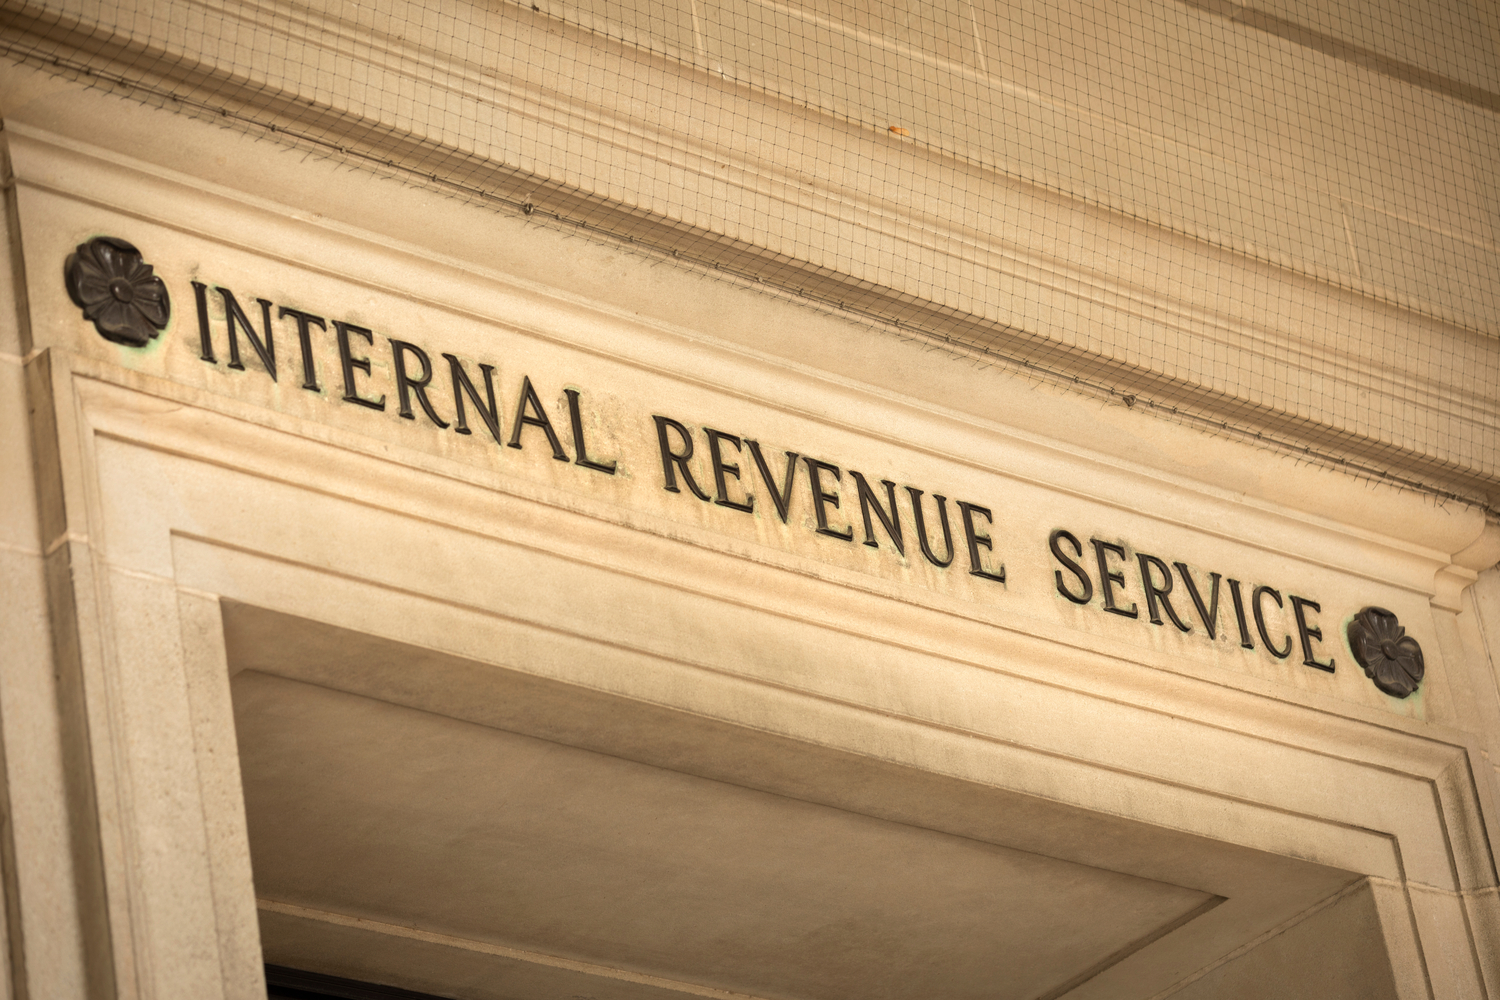 US Judge Refuses To Quash IRS Summons For Bitstamp Exchange Records